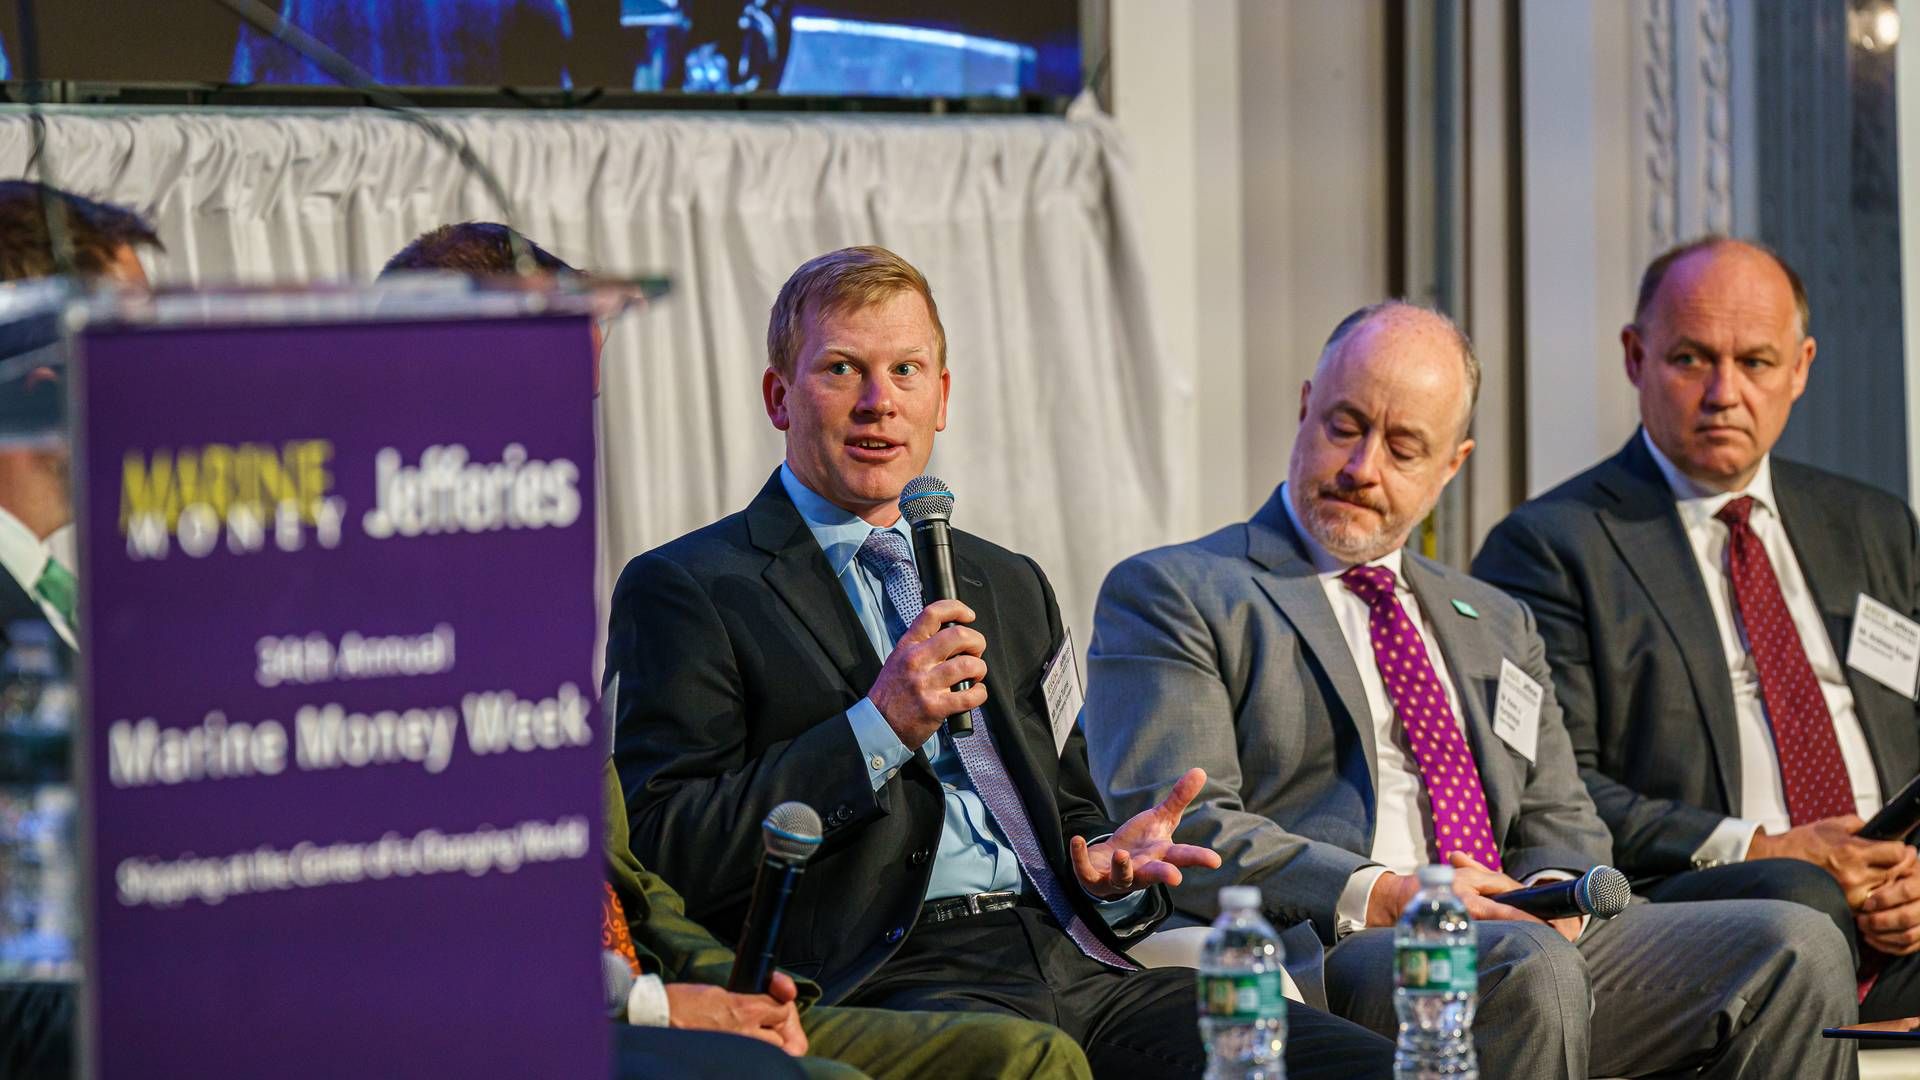 Matt Turner, chief of strategy in energy company Chevron’s shipping company, was attending the Marine Money conference in New York to discuss decarbonization. | Photo: David Butler